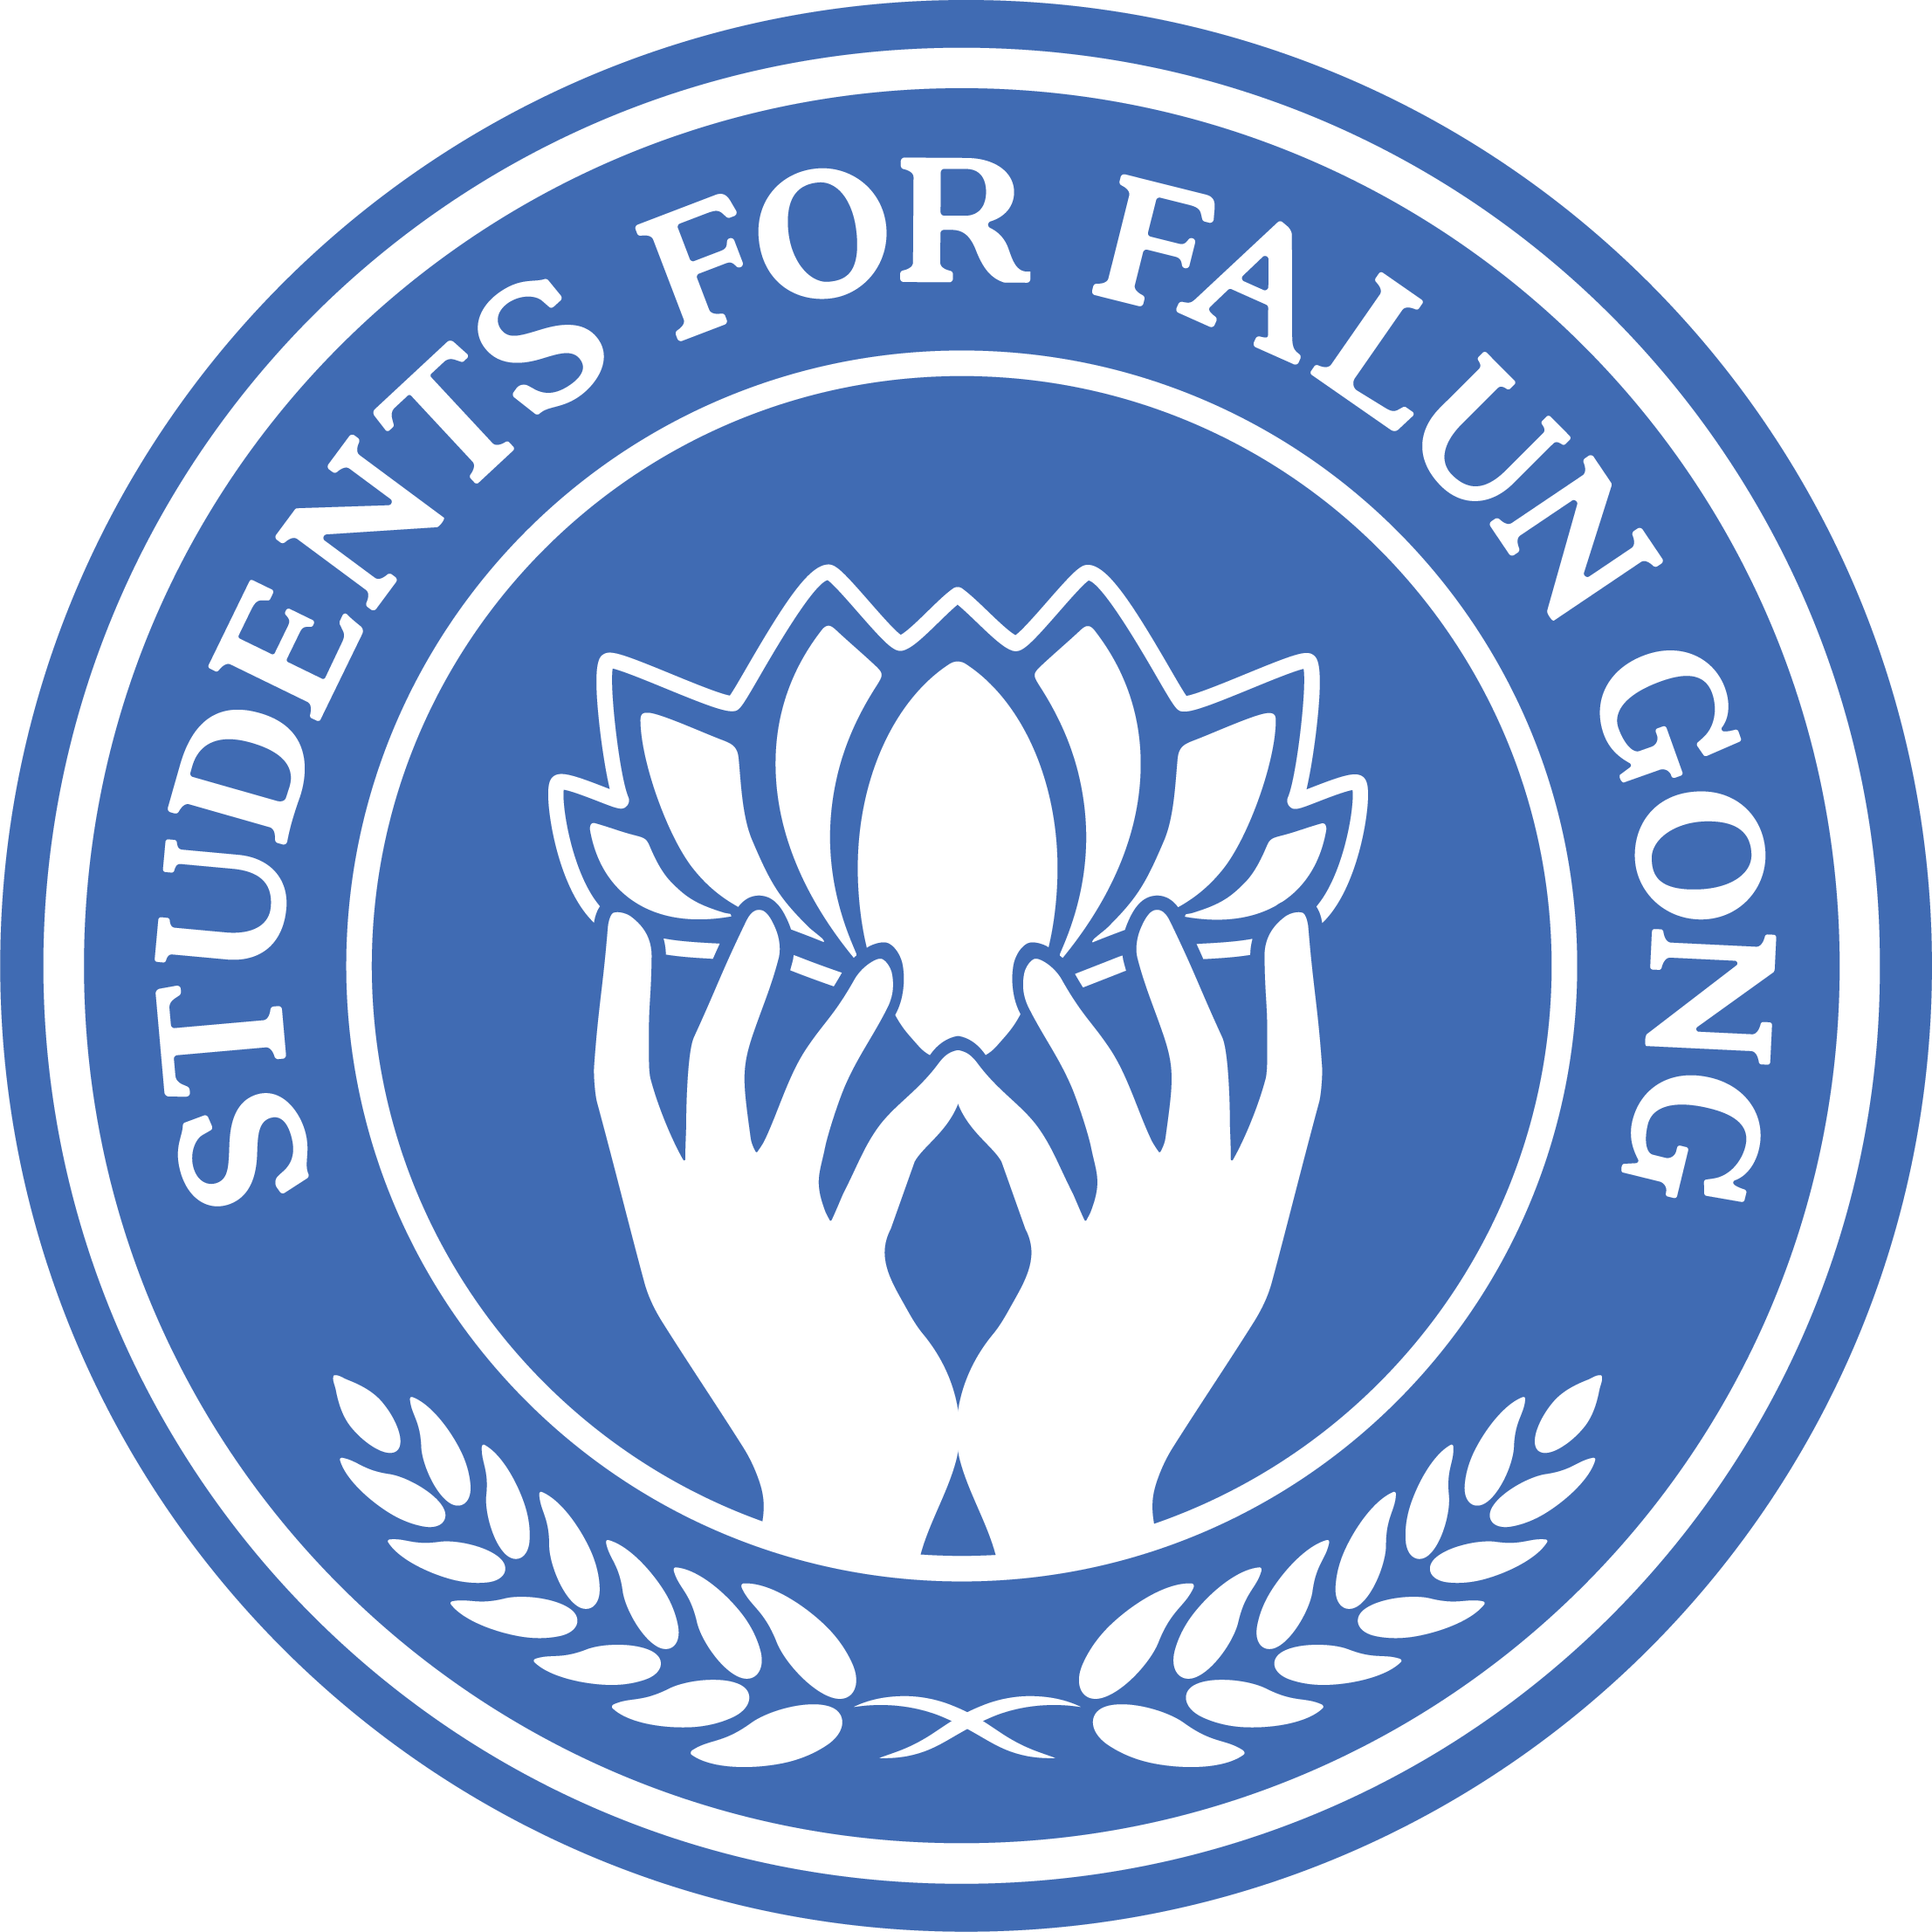 Students for Falun Gong